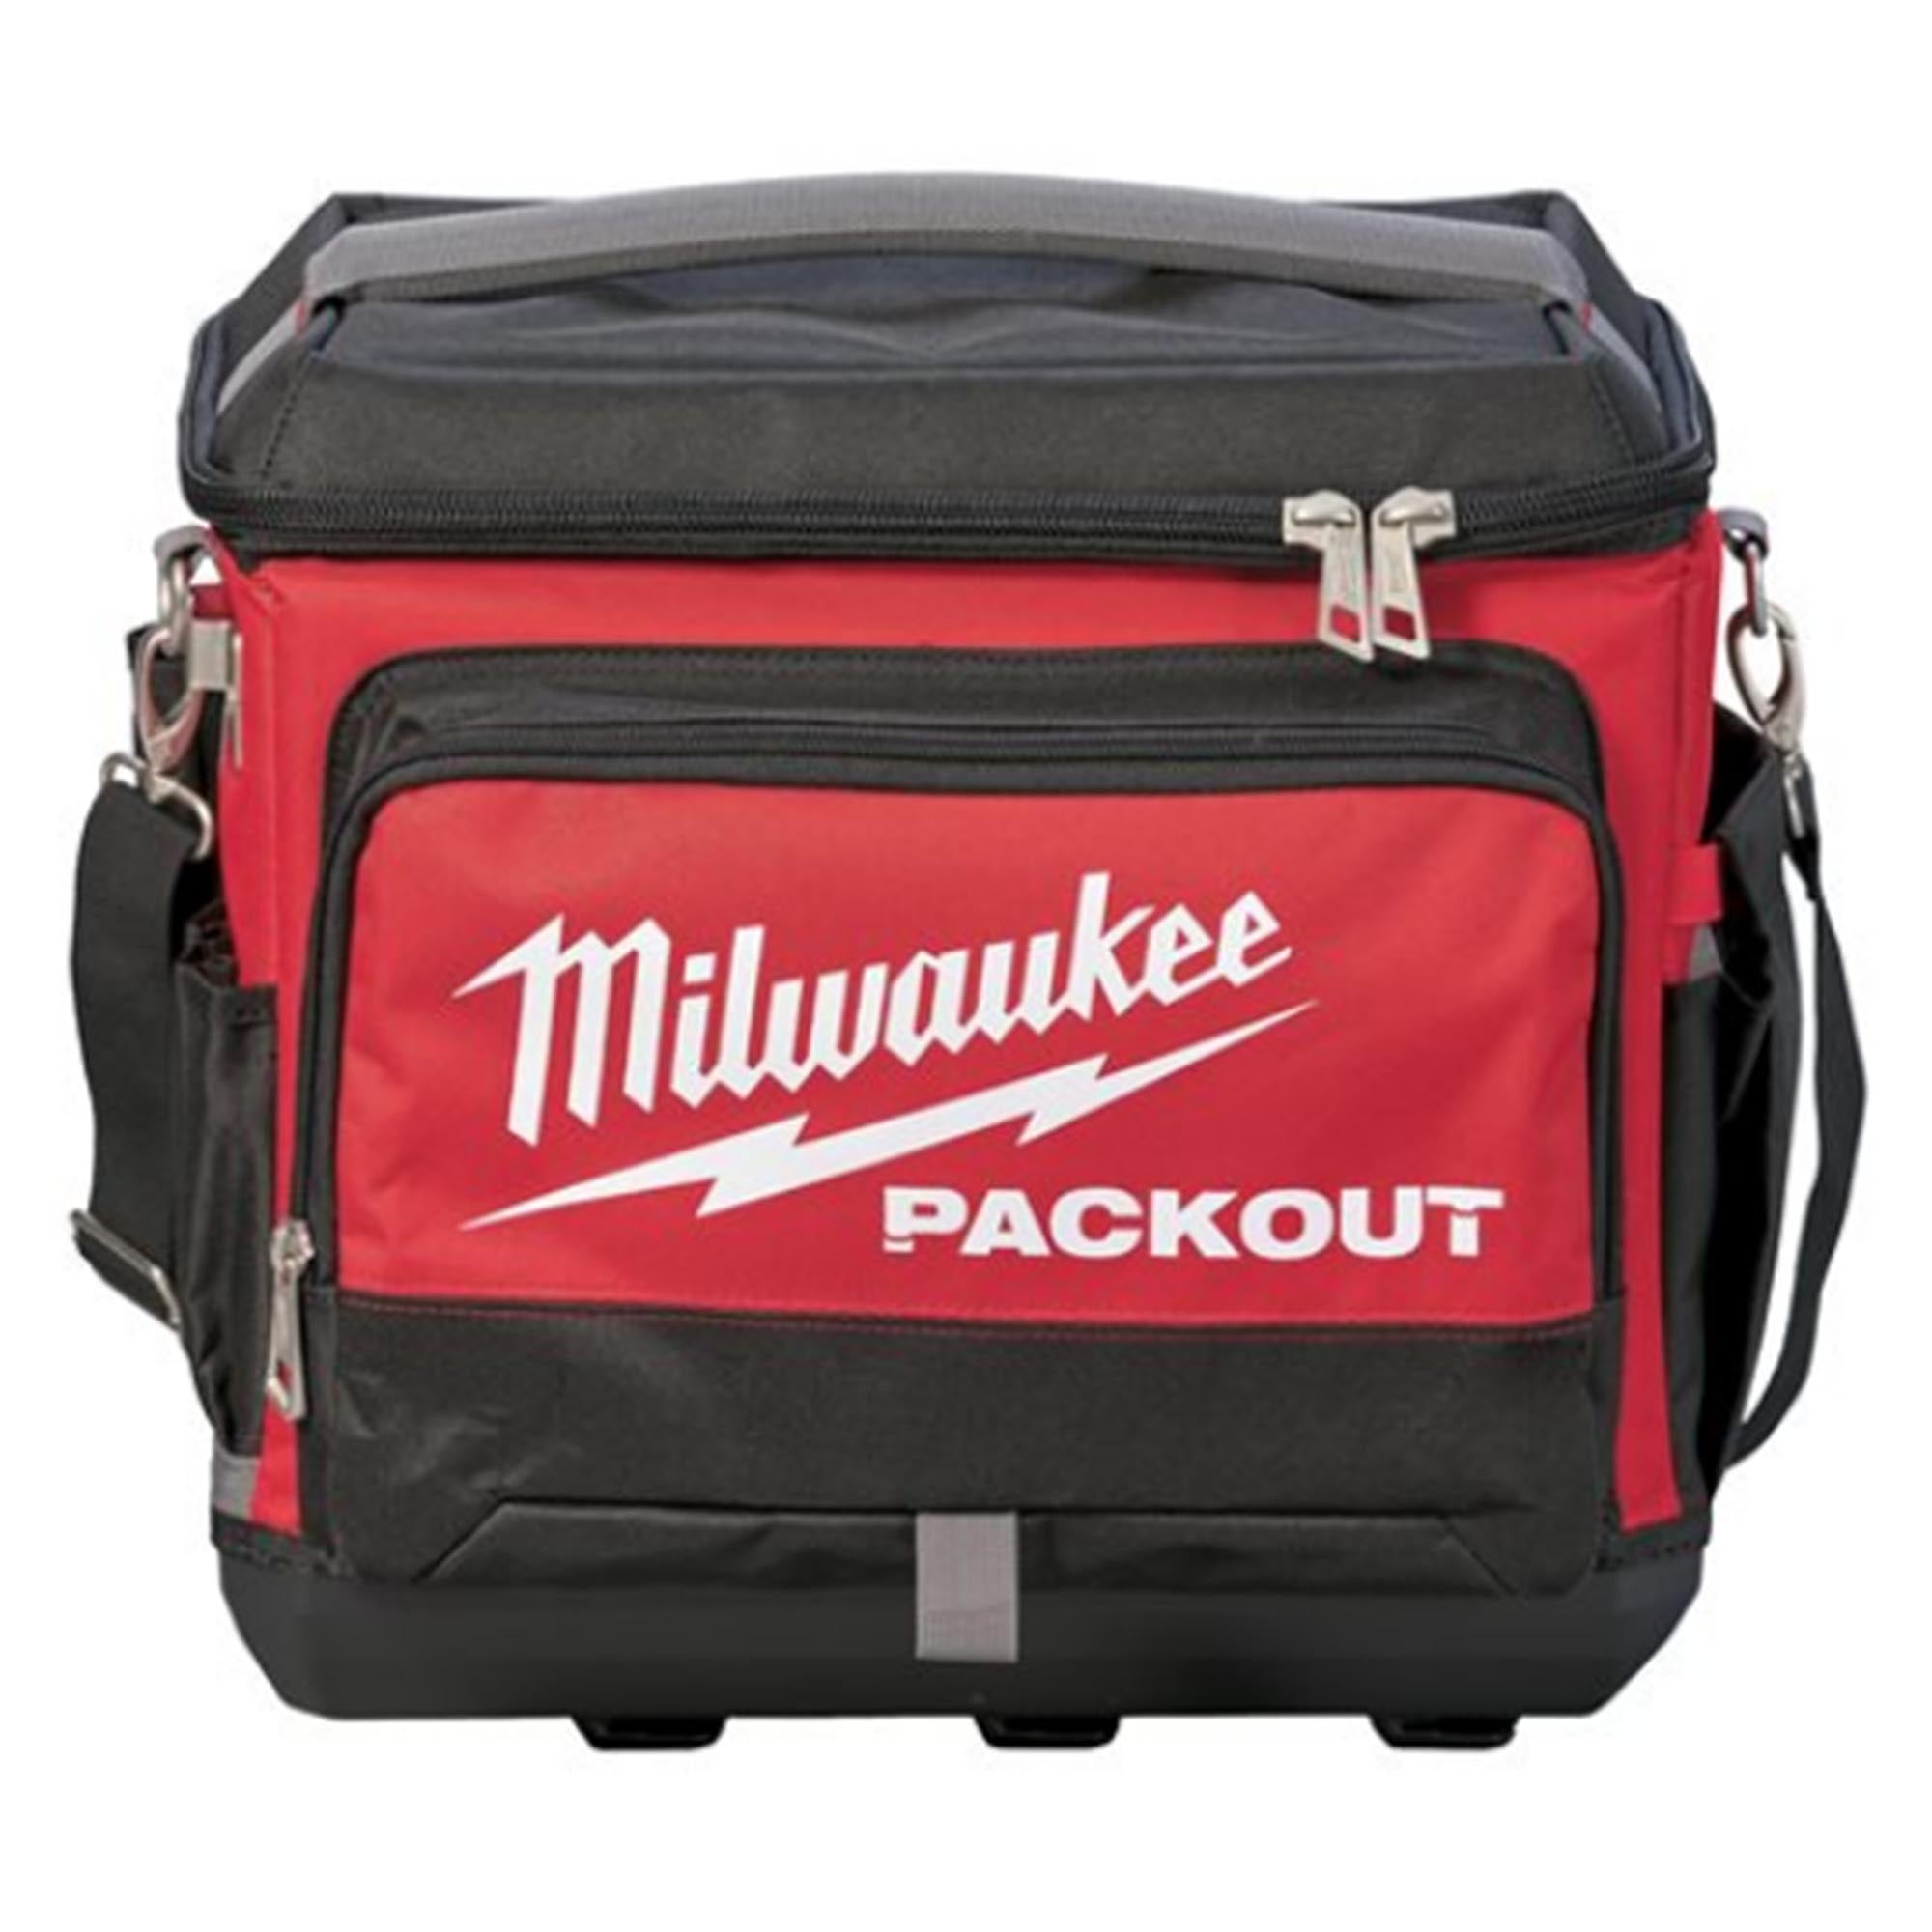 Sac Thermique Milwaukee Packout